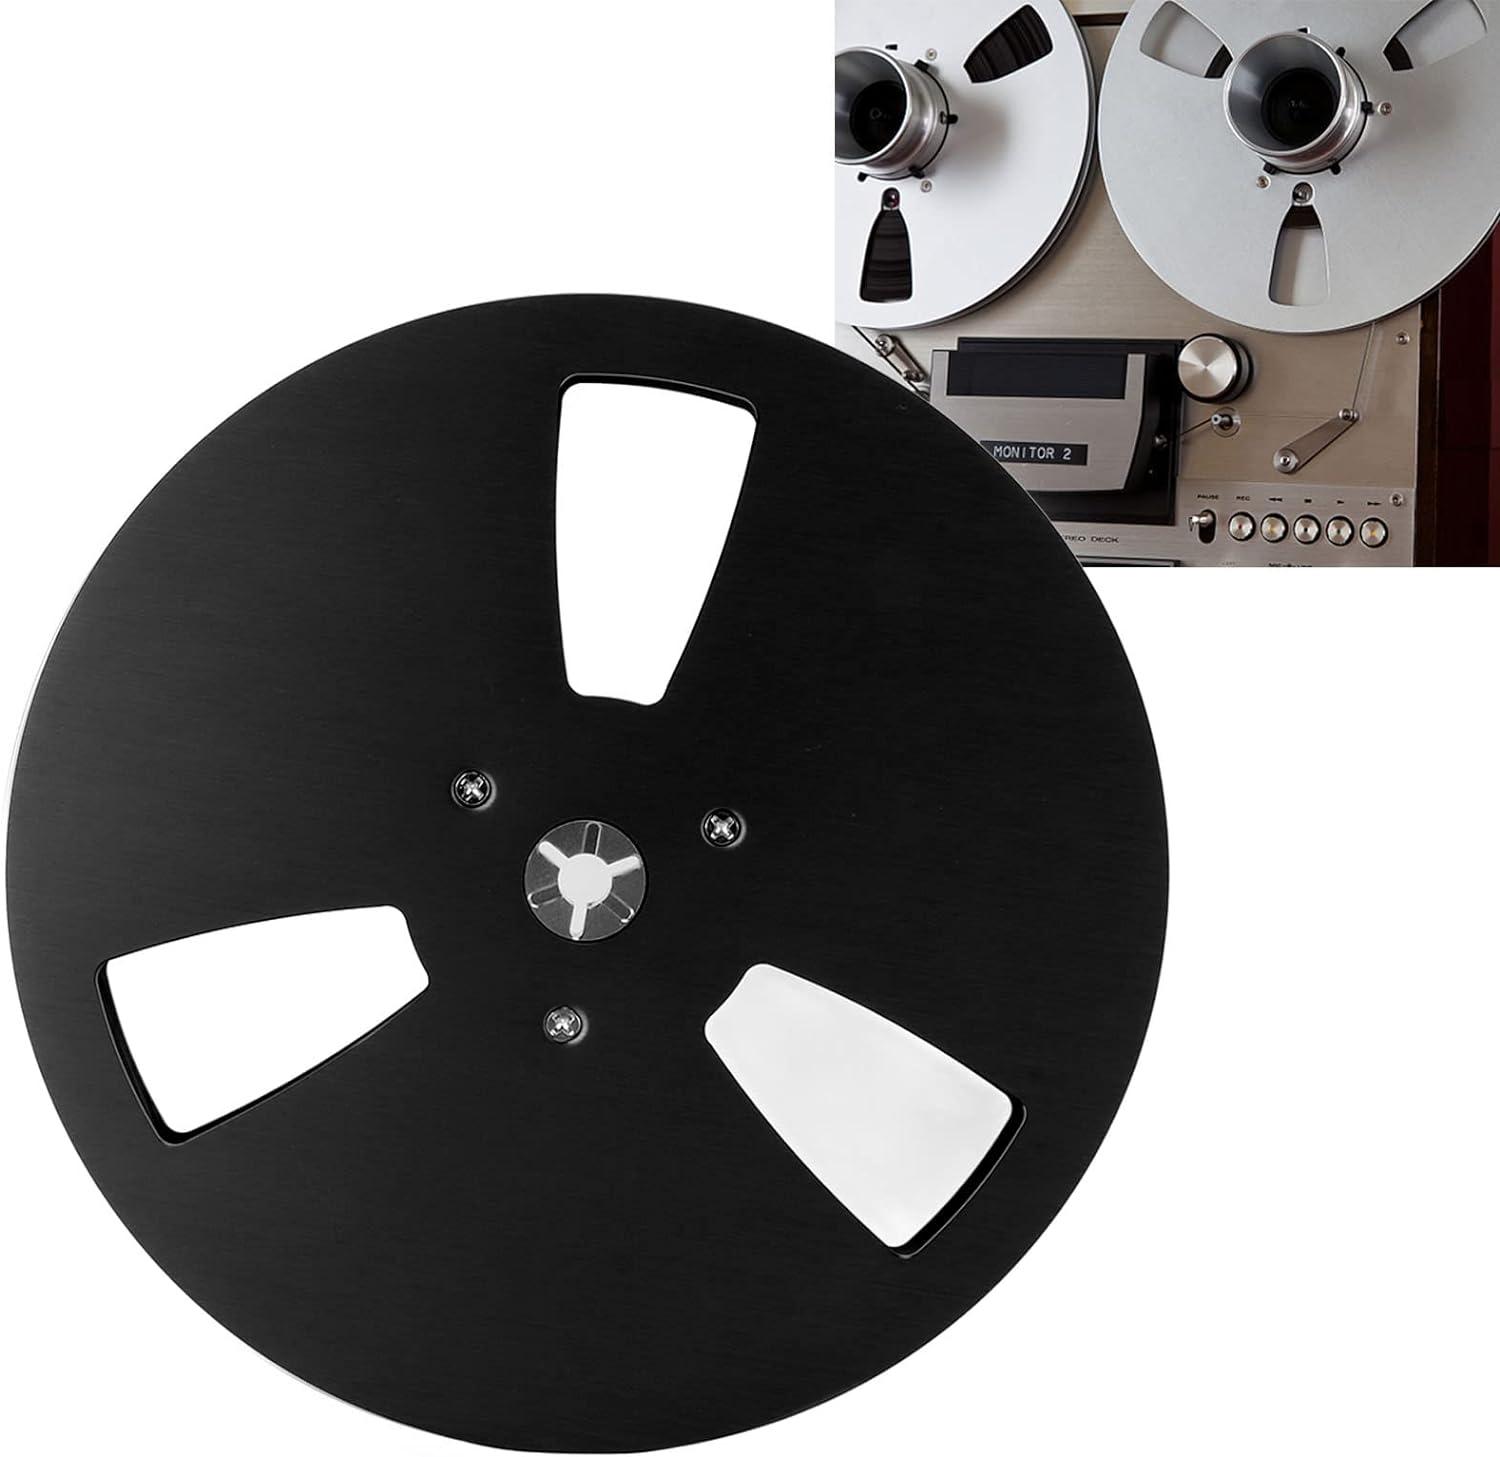  TEAC Empty Reel for Reel to Reel Tape - 2-Hole